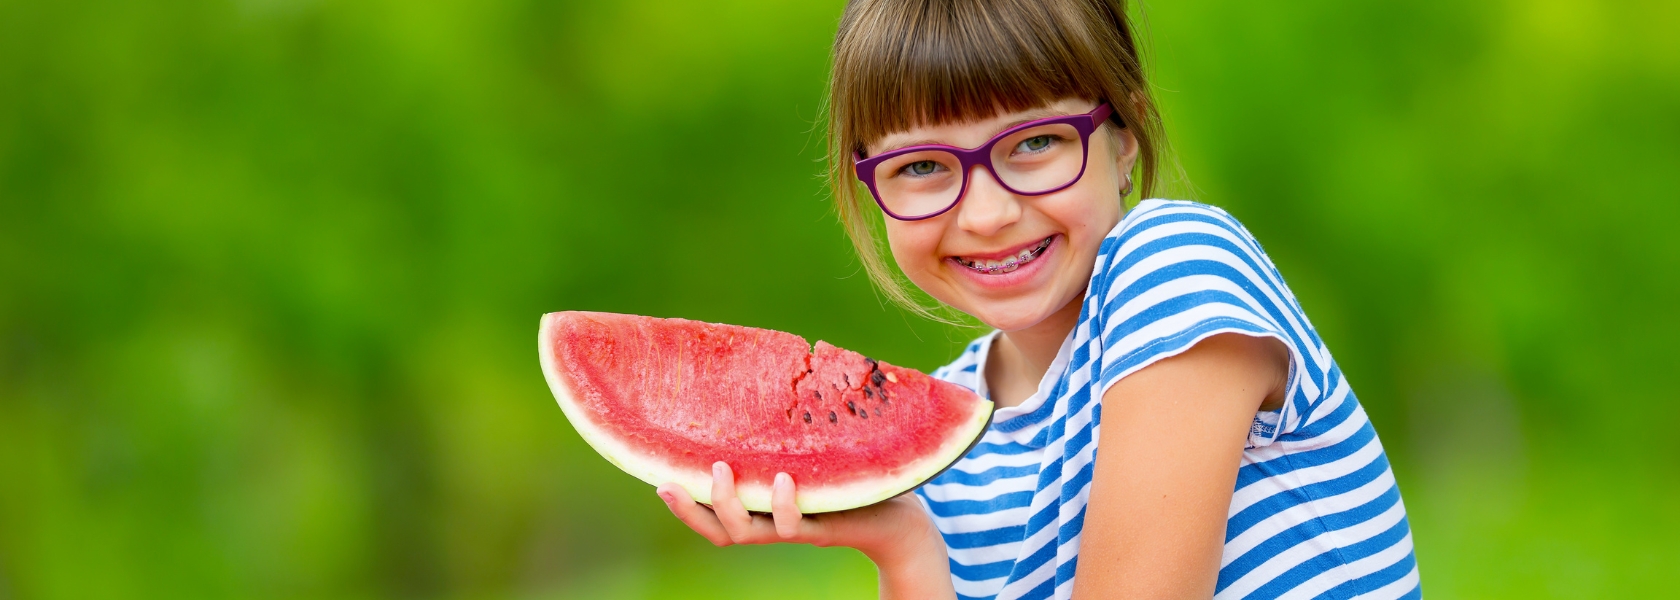 Braces-Friendly Foods - Girl With Braces Eating Watermelon